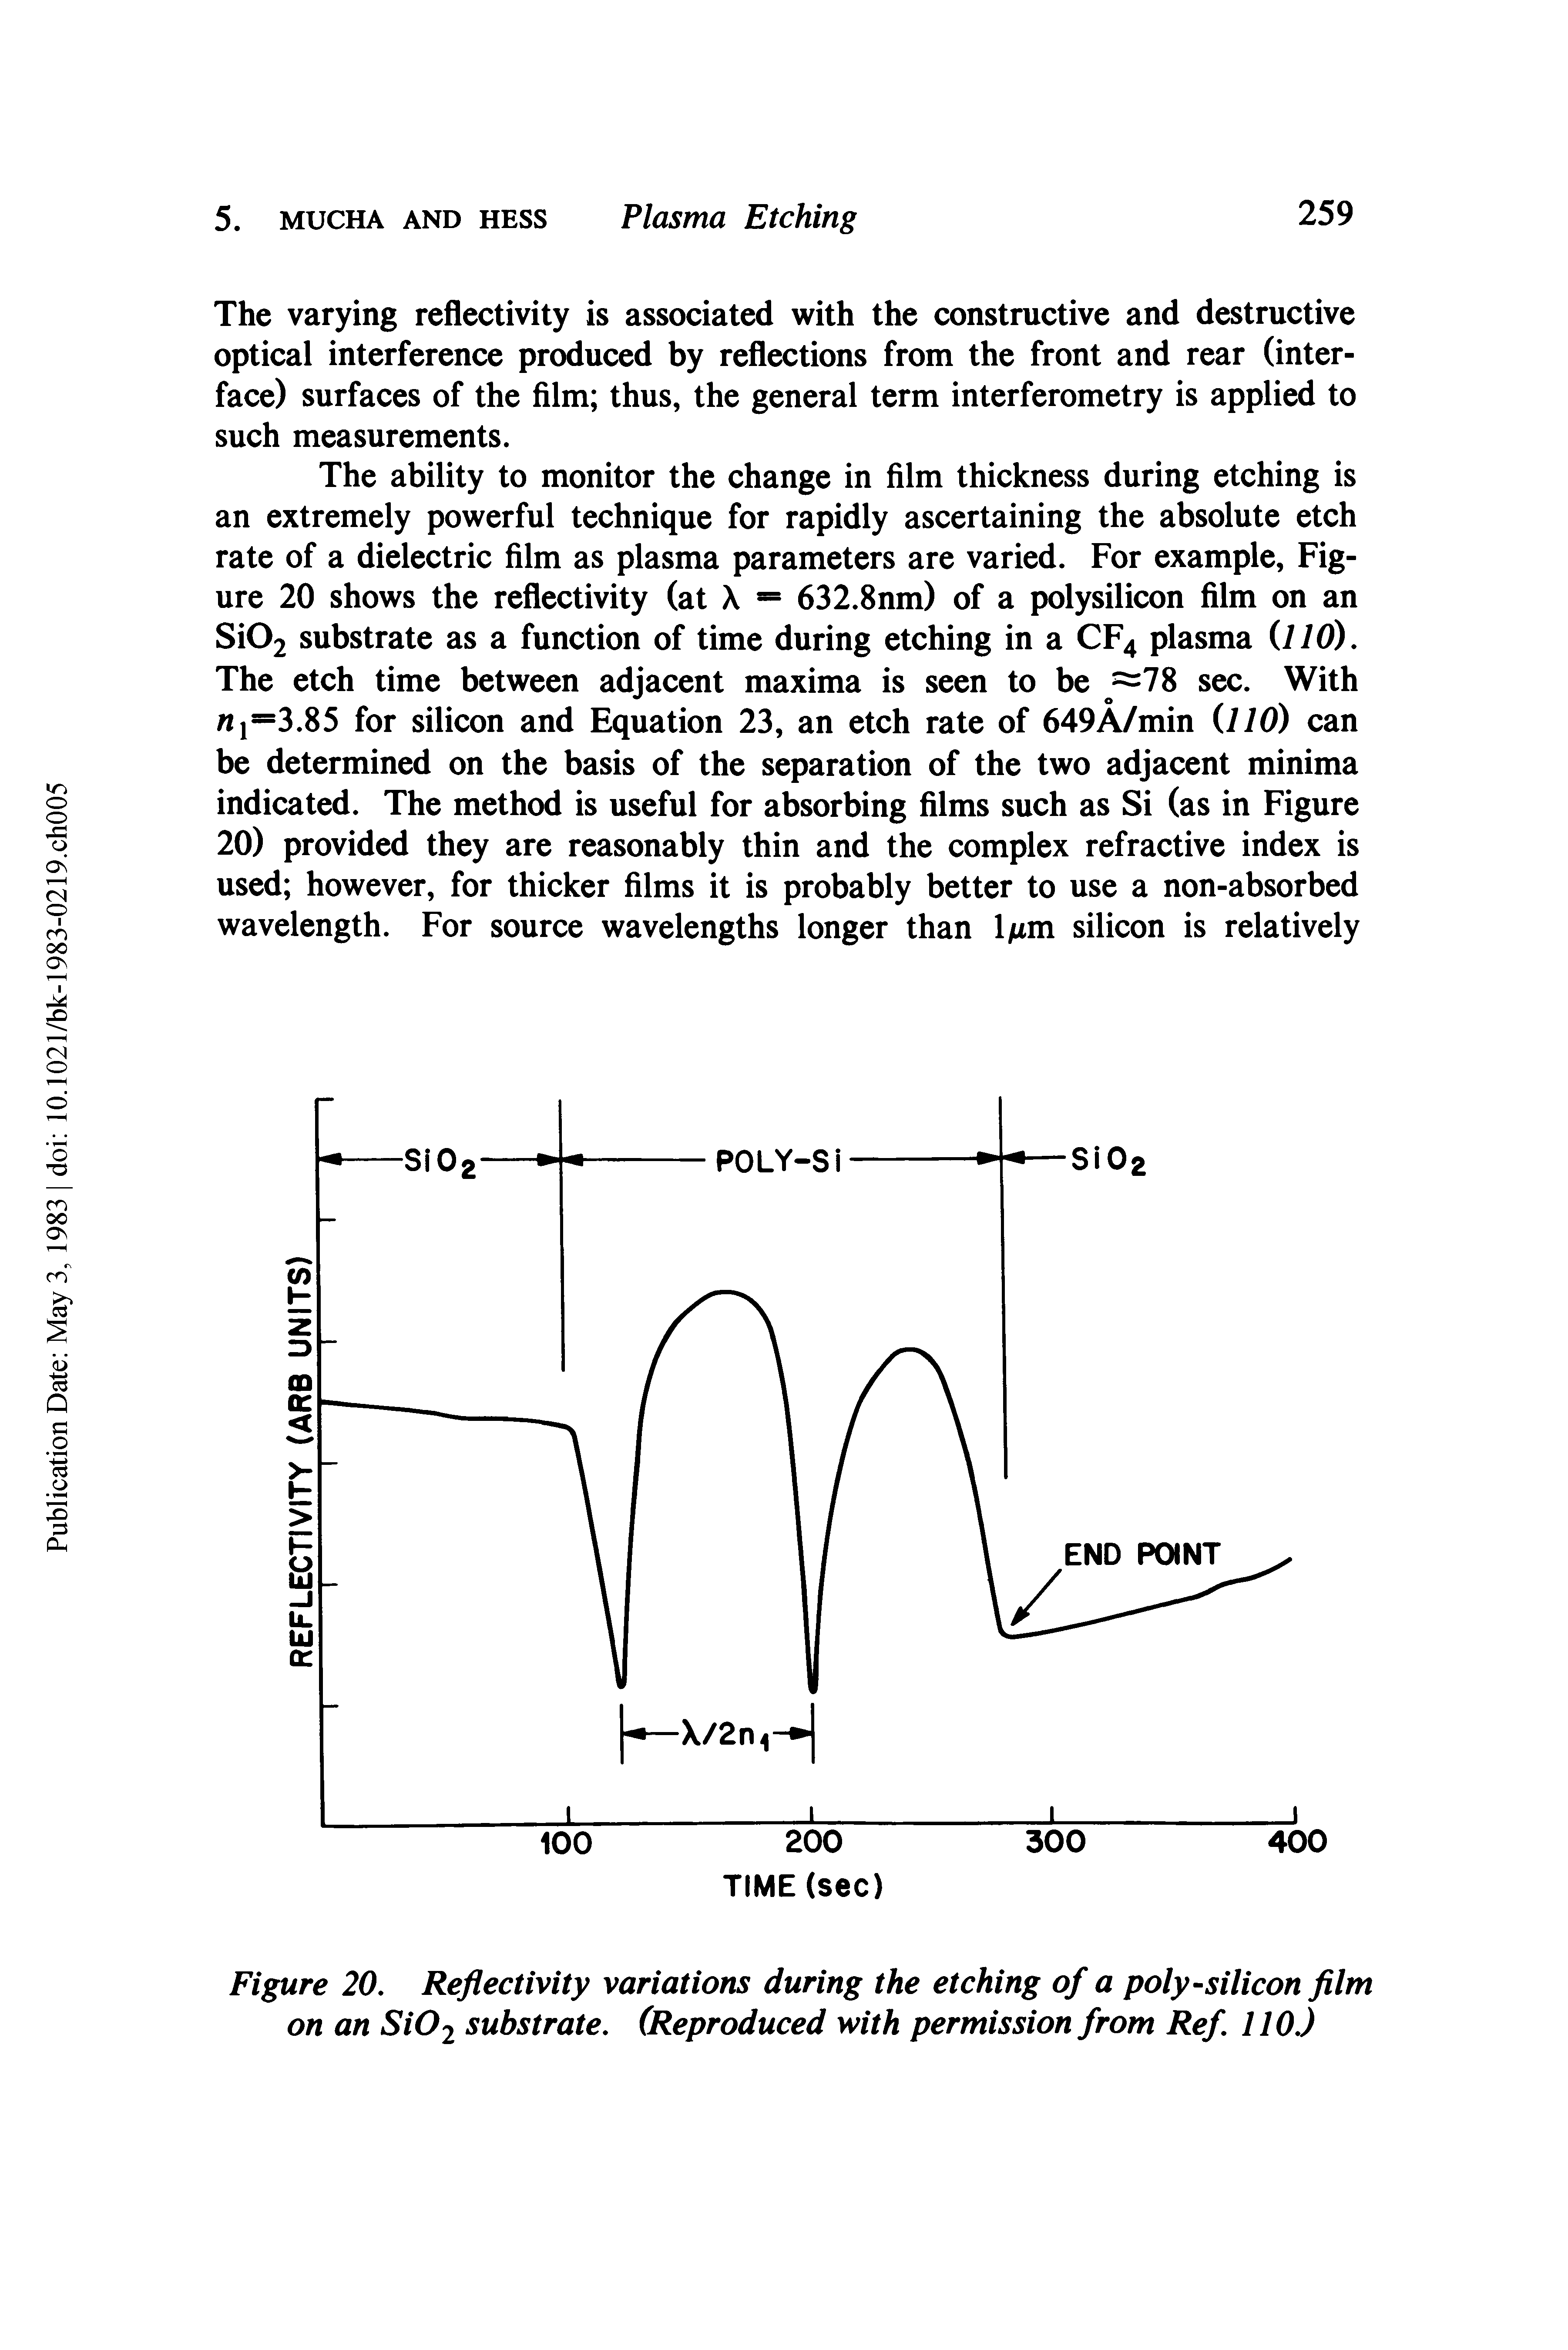 Figure 20, Reflectivity variations during the etching of a poly-silicon film on an Si02 substrate, (Reproduced with permission from Ref, 110,)...